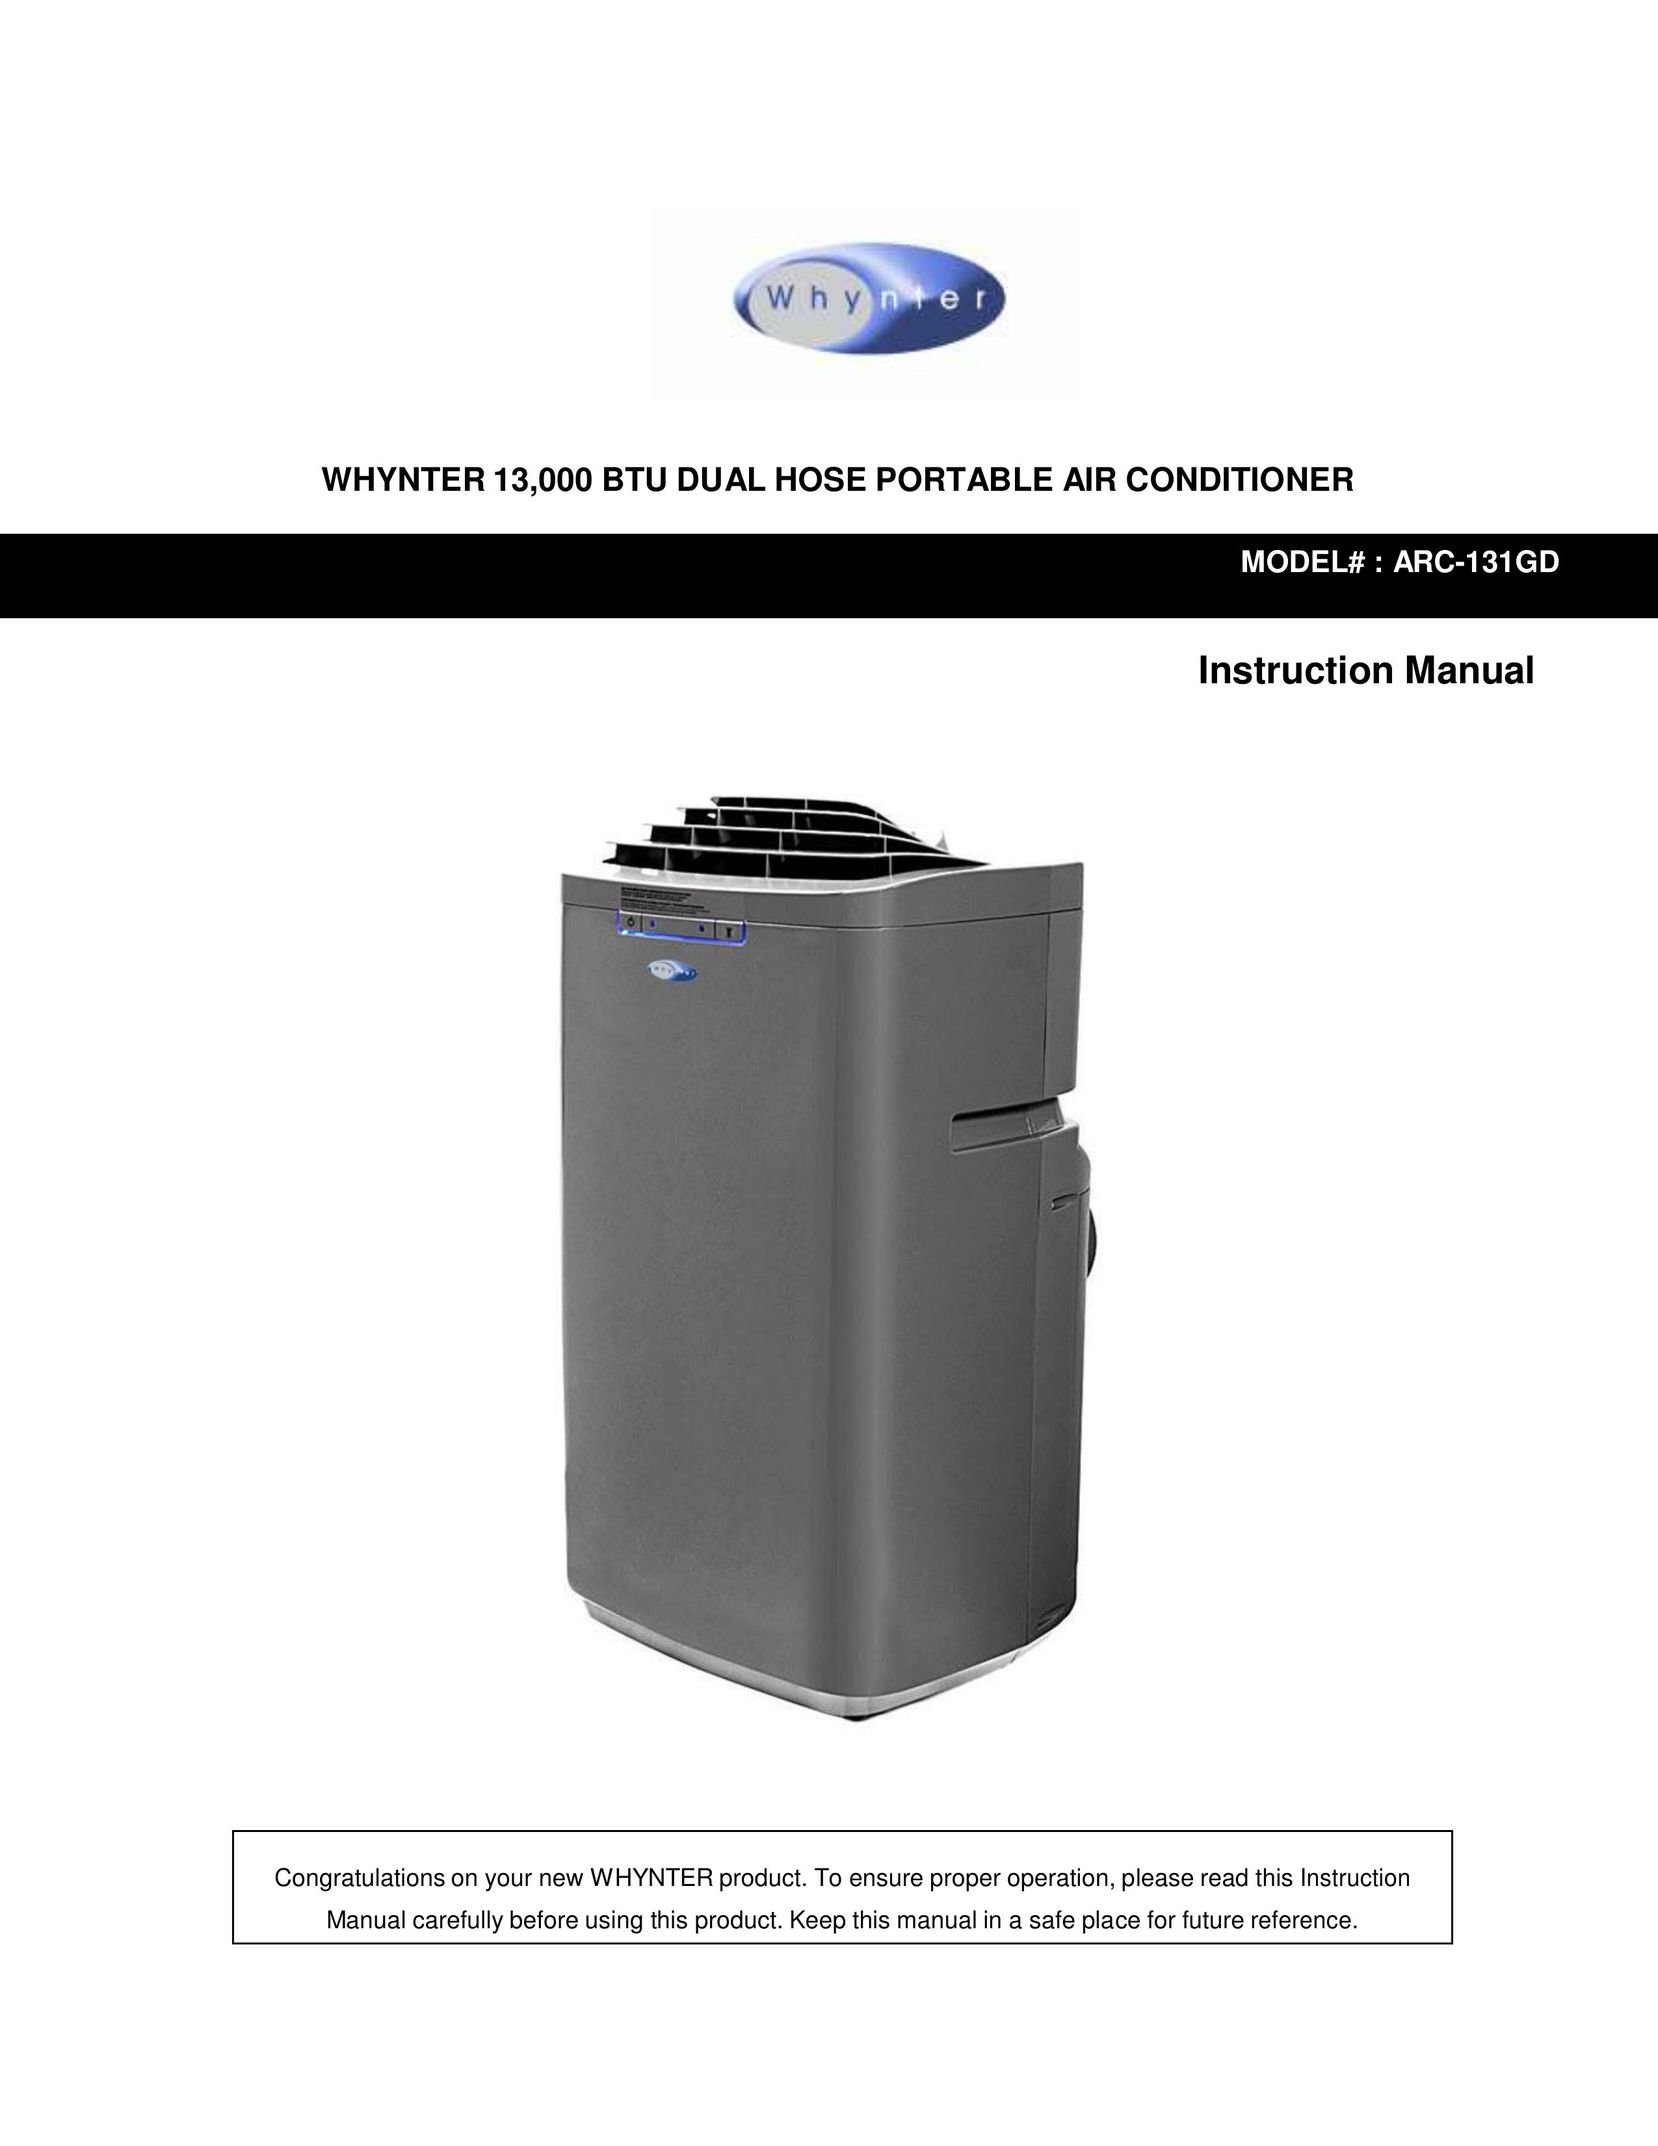 Whynter ARC-131GD Air Conditioner User Manual